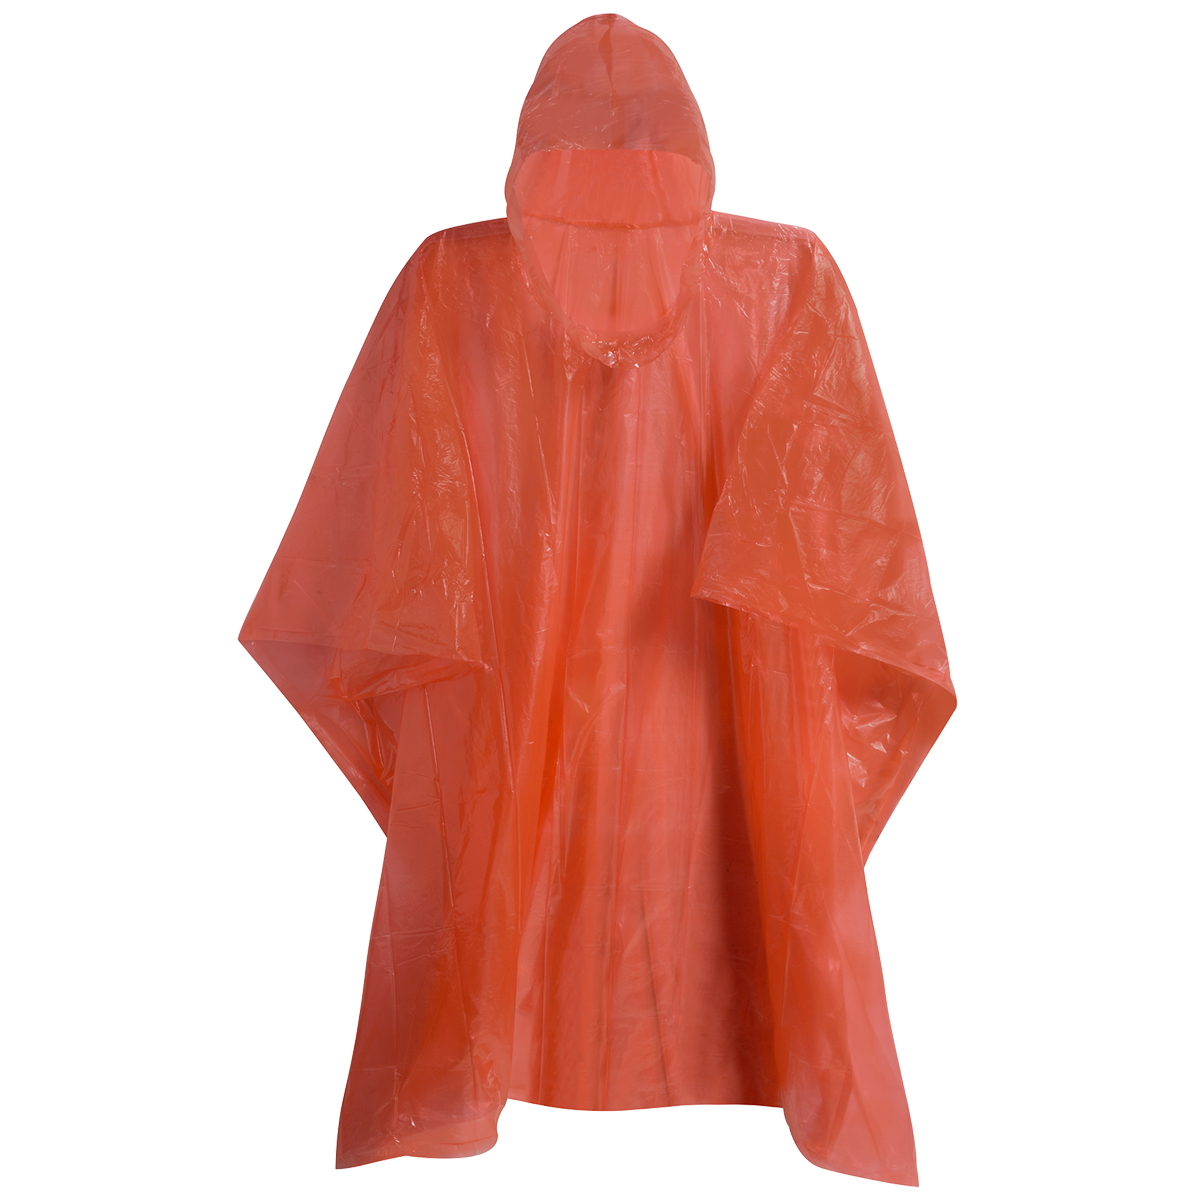 Poncho Impermeable Great Desechable Rojo 130 x 100 cm